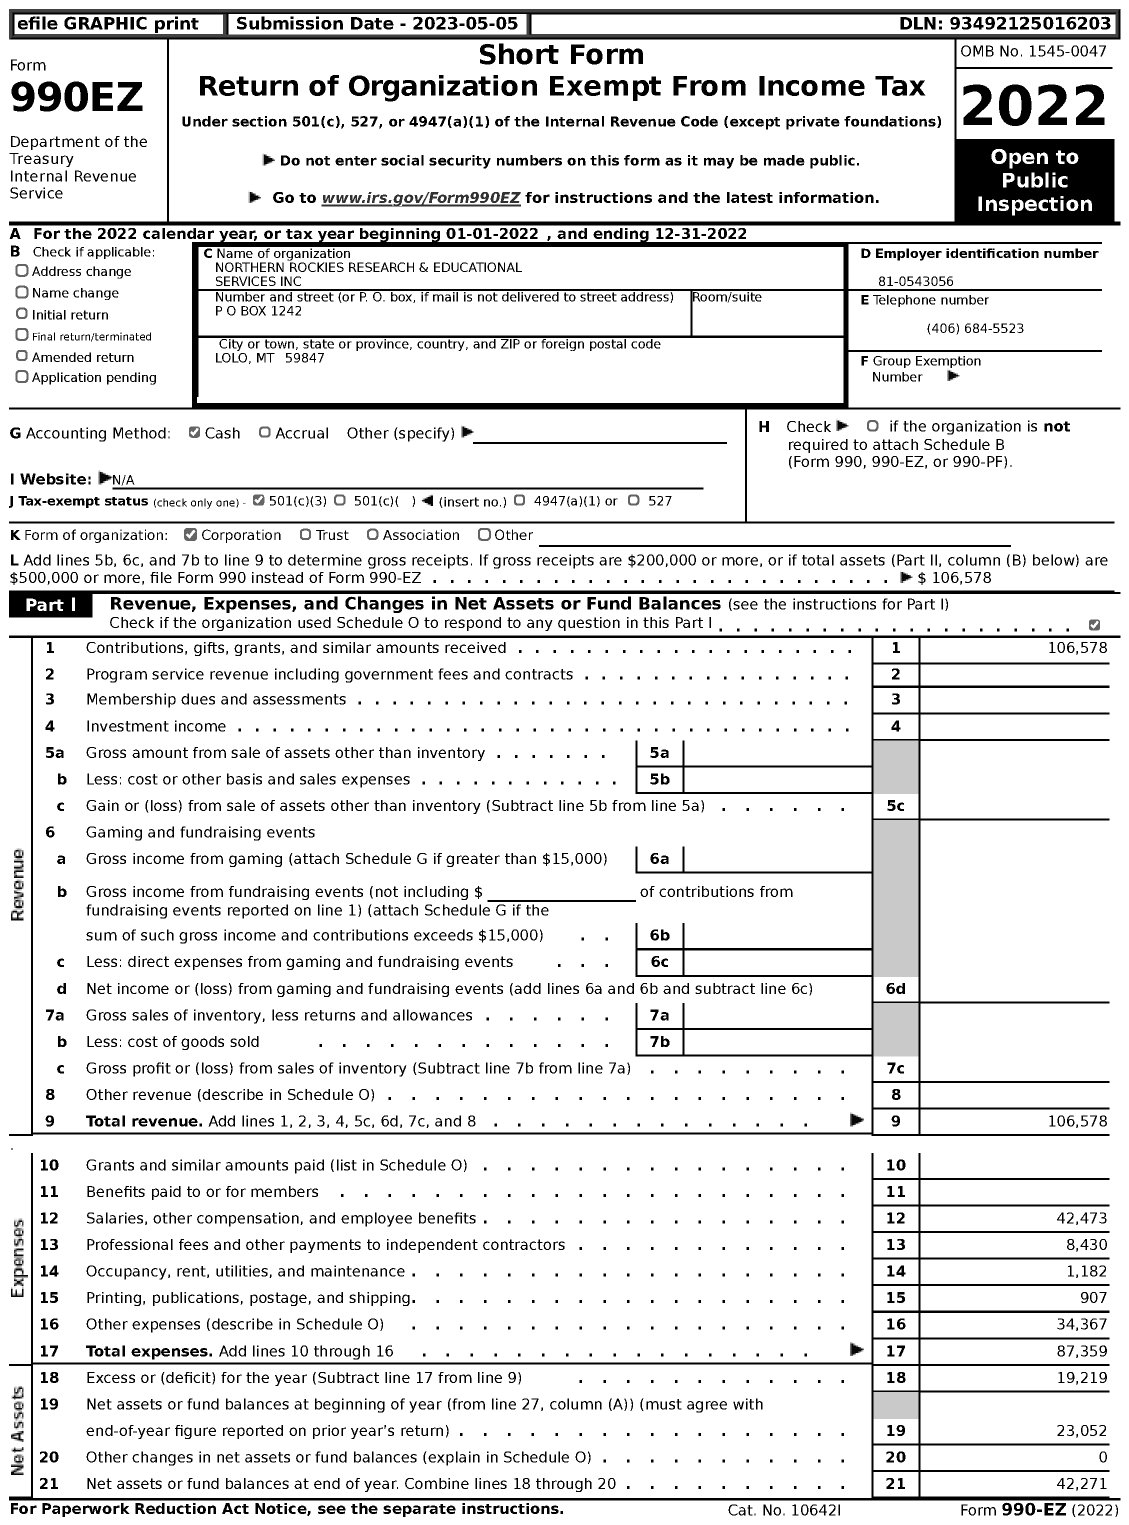 Image of first page of 2022 Form 990EZ for Northern Rockies Research and Educational Services